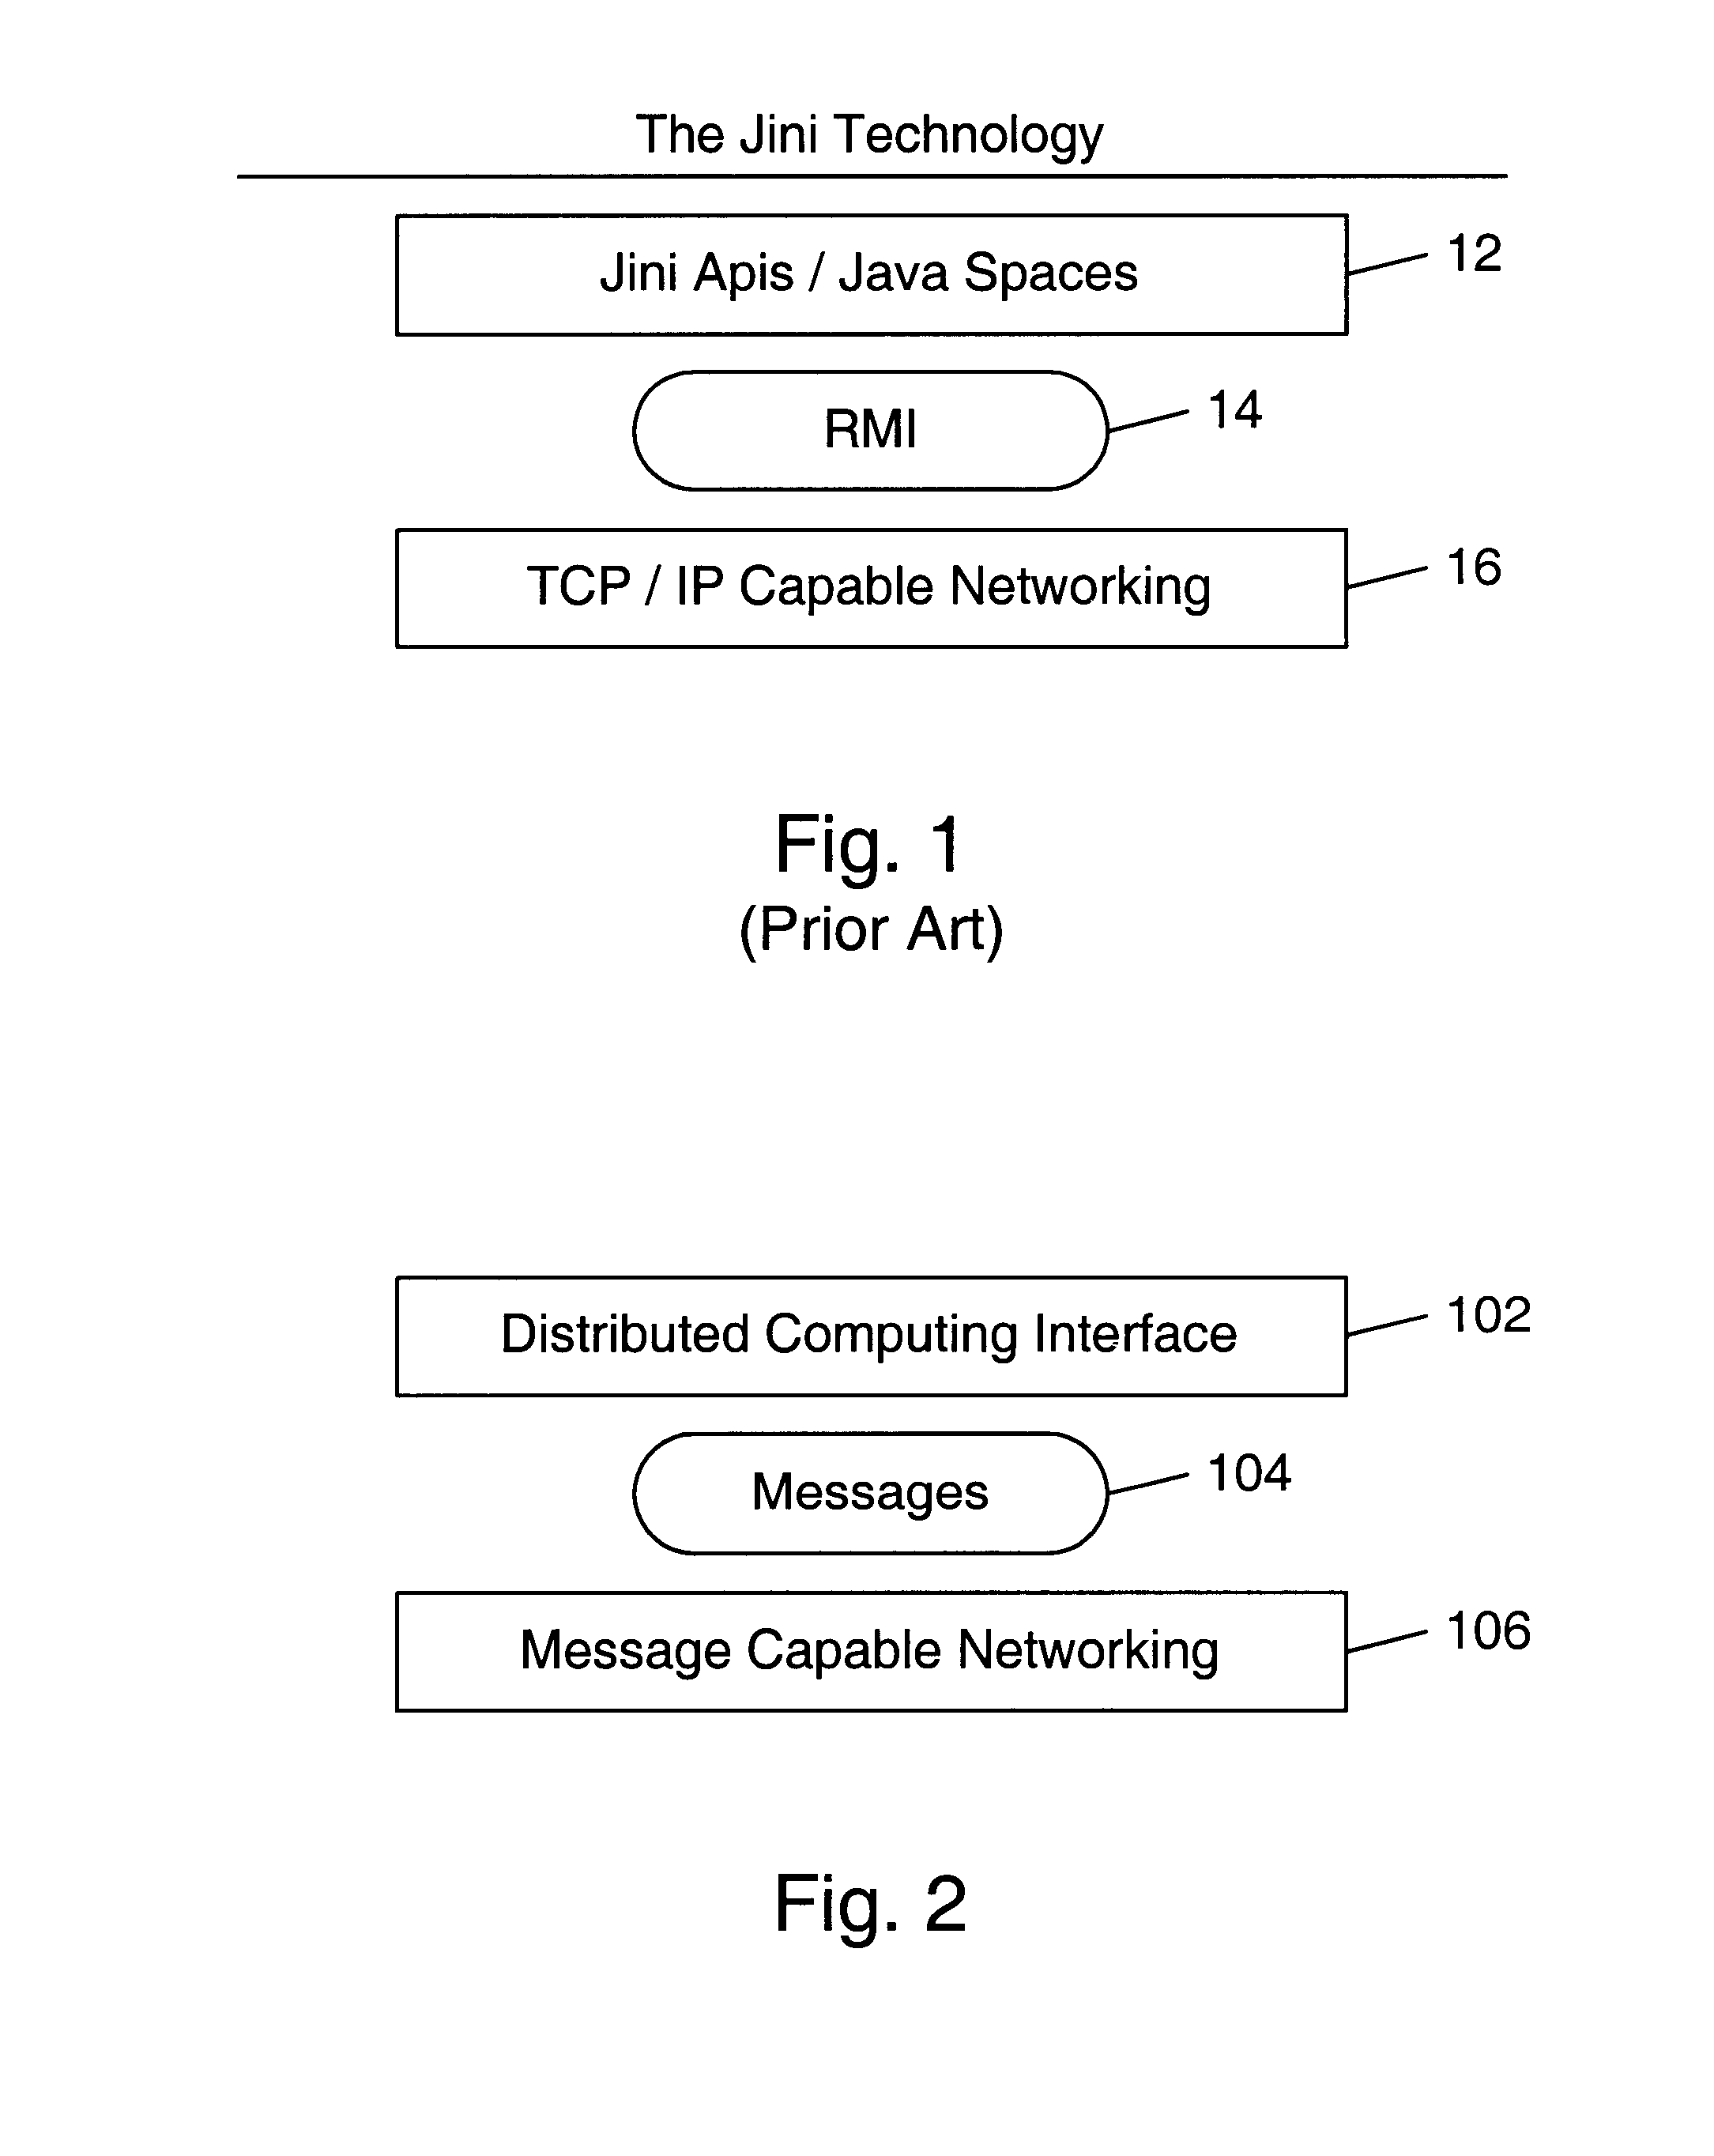 Trusted construction of message endpoints in a distributed computing environment